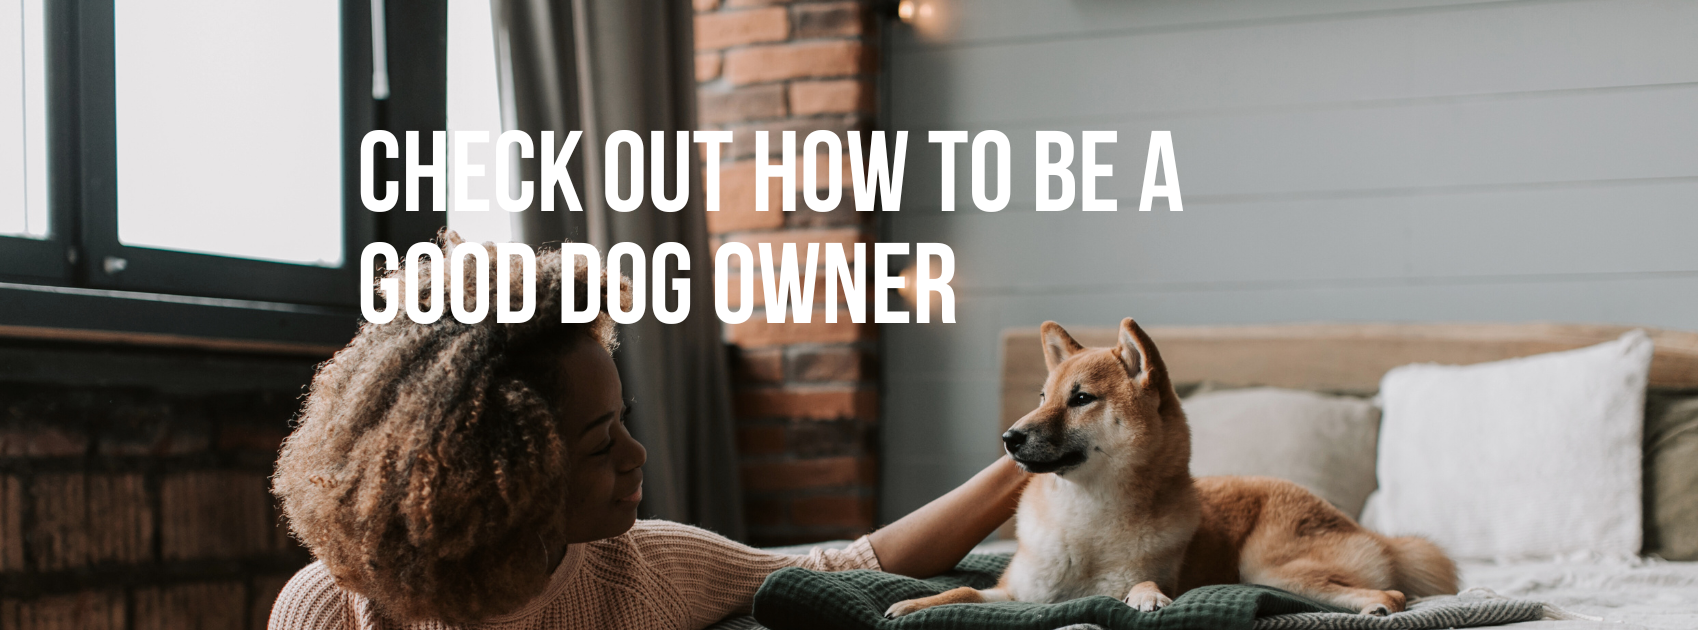 CHECK OUT HOW TO BE A GOOD DOG OWNER